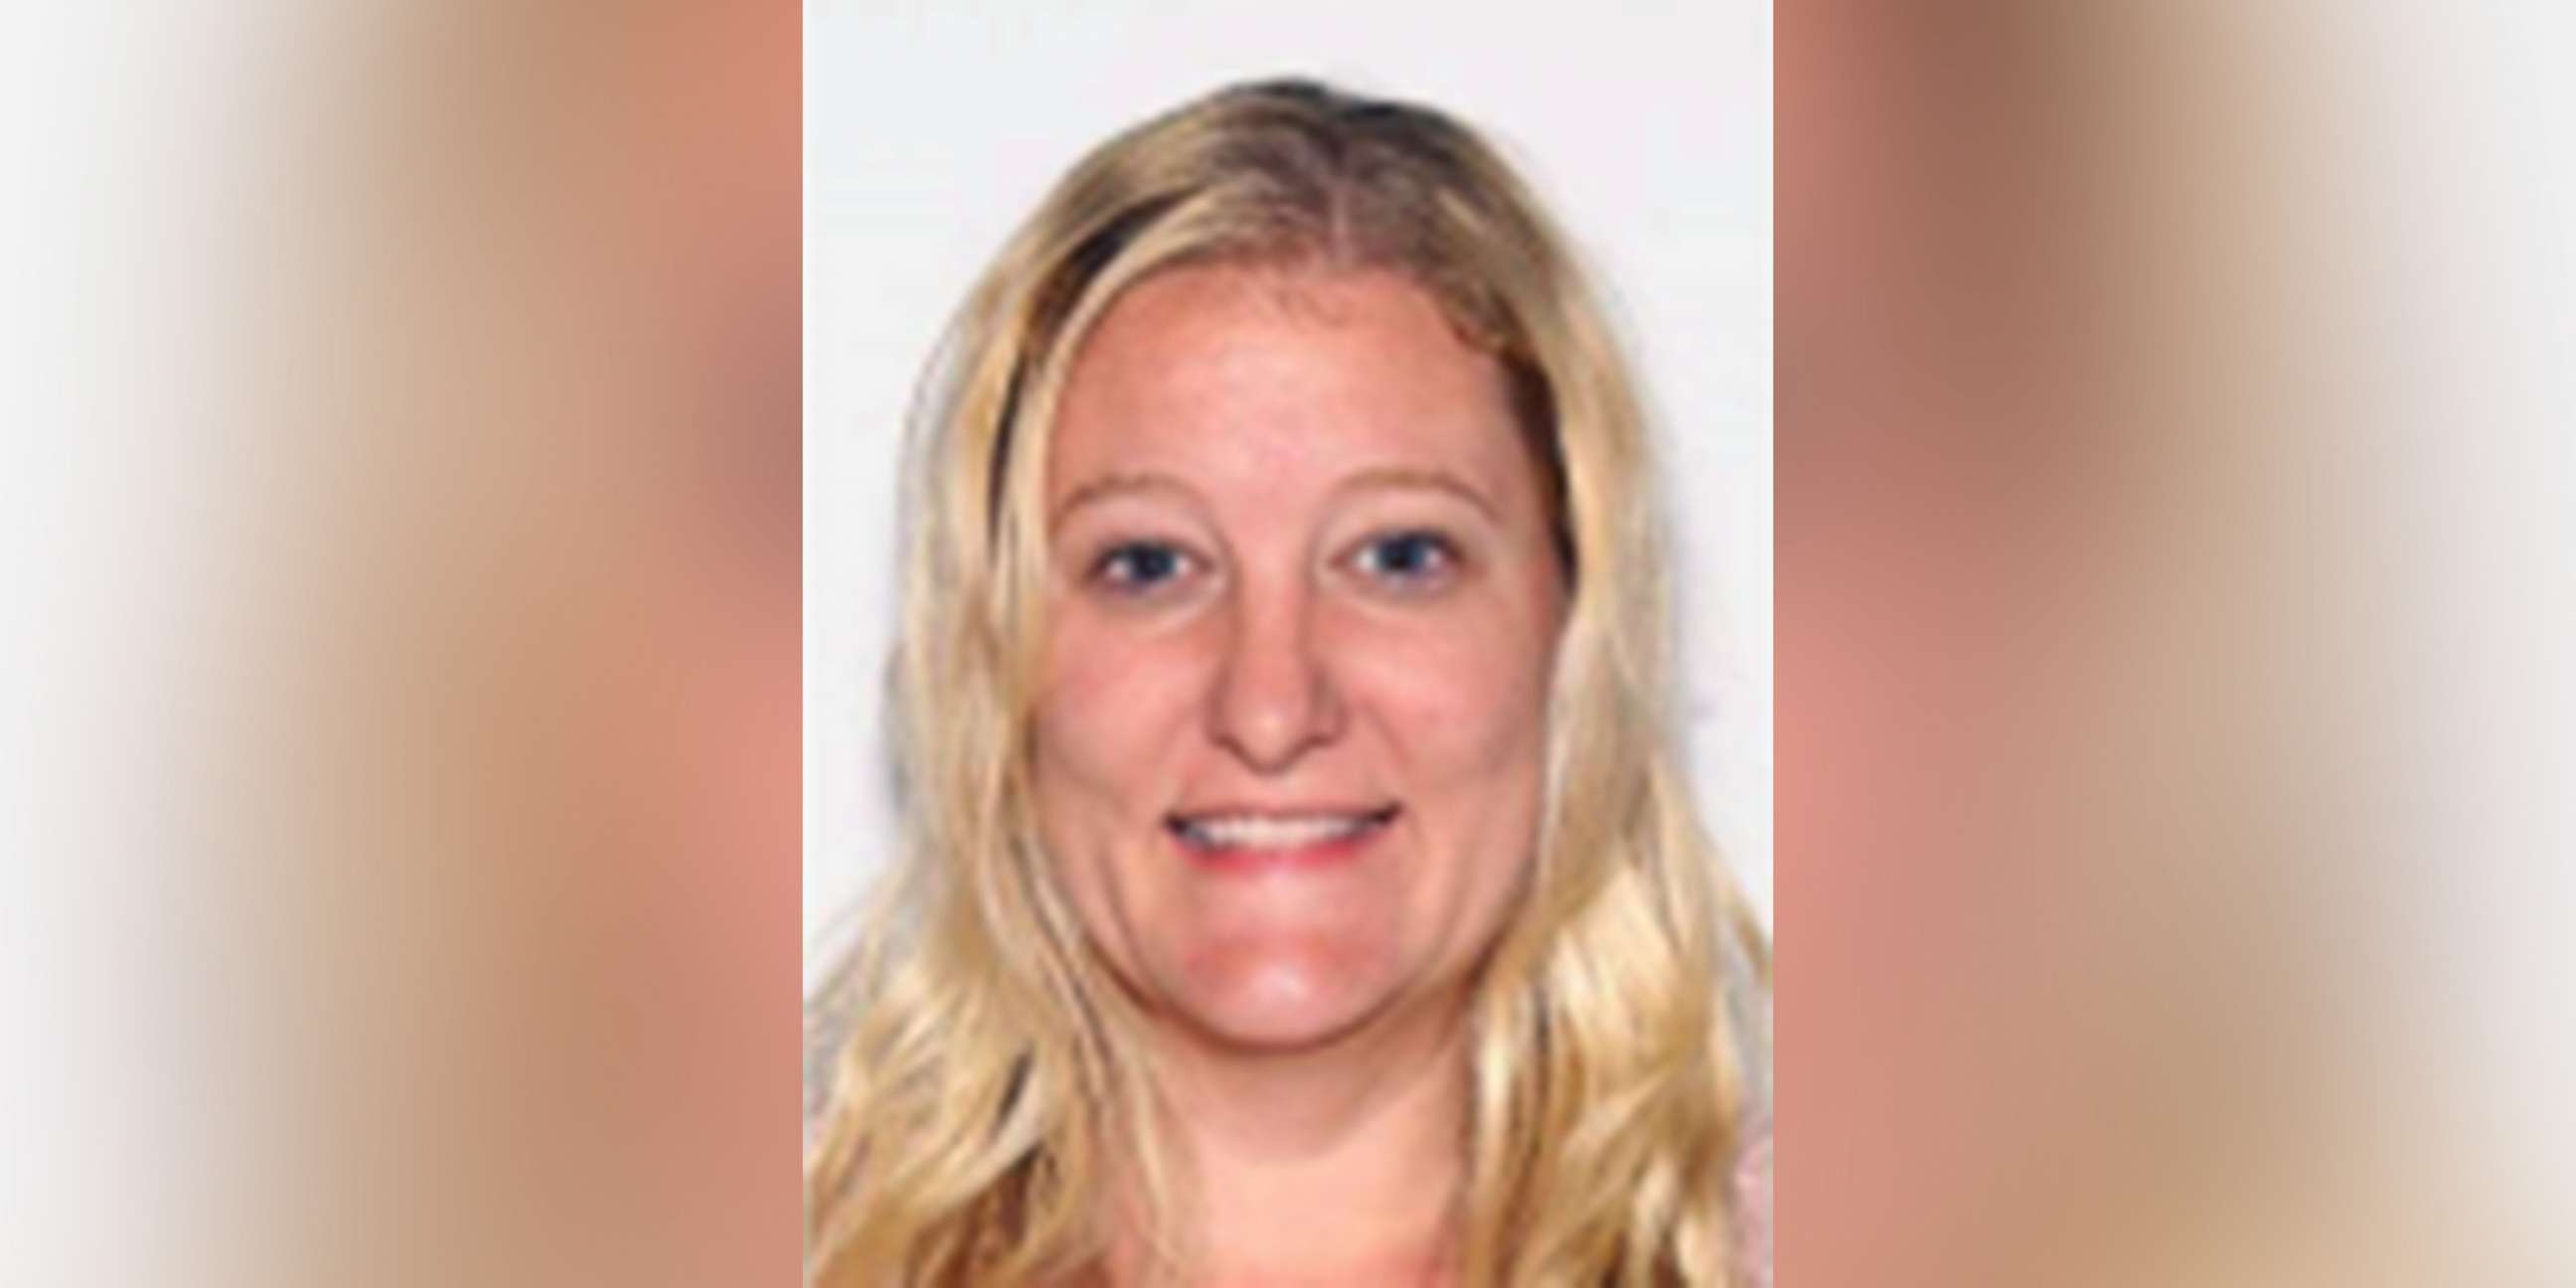 PHOTO: Casei Jones is pictured in an undated photo released by the Marion County Sheriff's Office after she was reported missing by her family on Sept. 14, 2019.